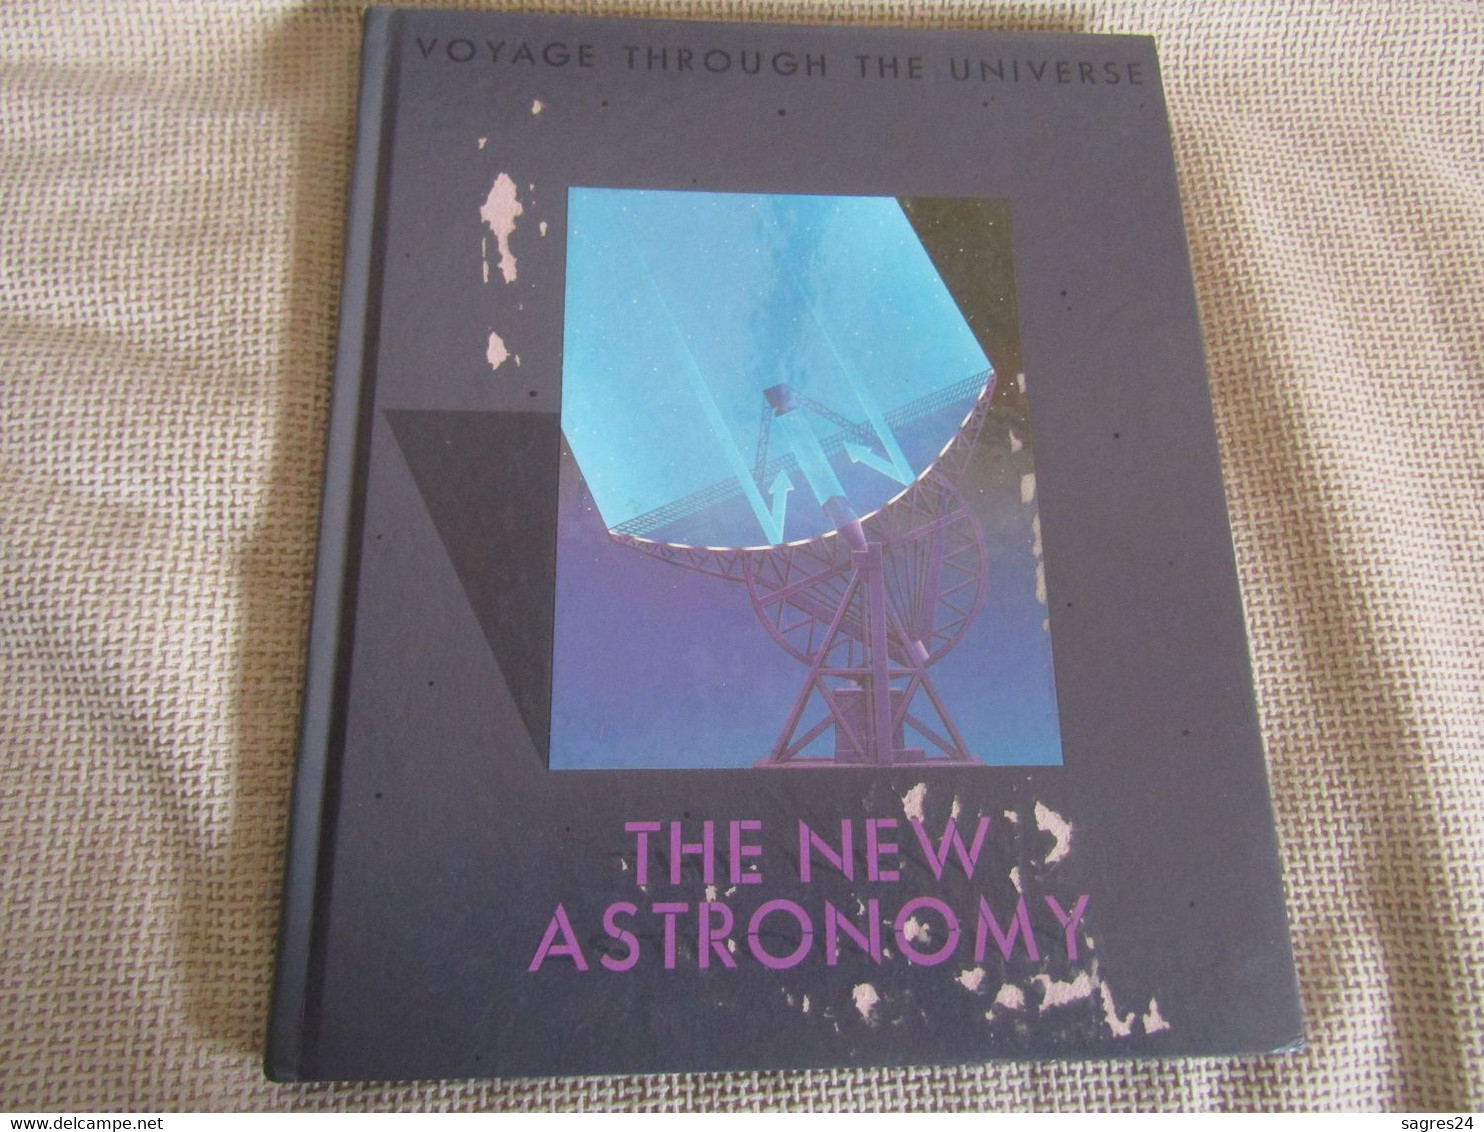 Voyage Through The Universe - The New Astronomy - Time-Life Books - Sterrenkunde